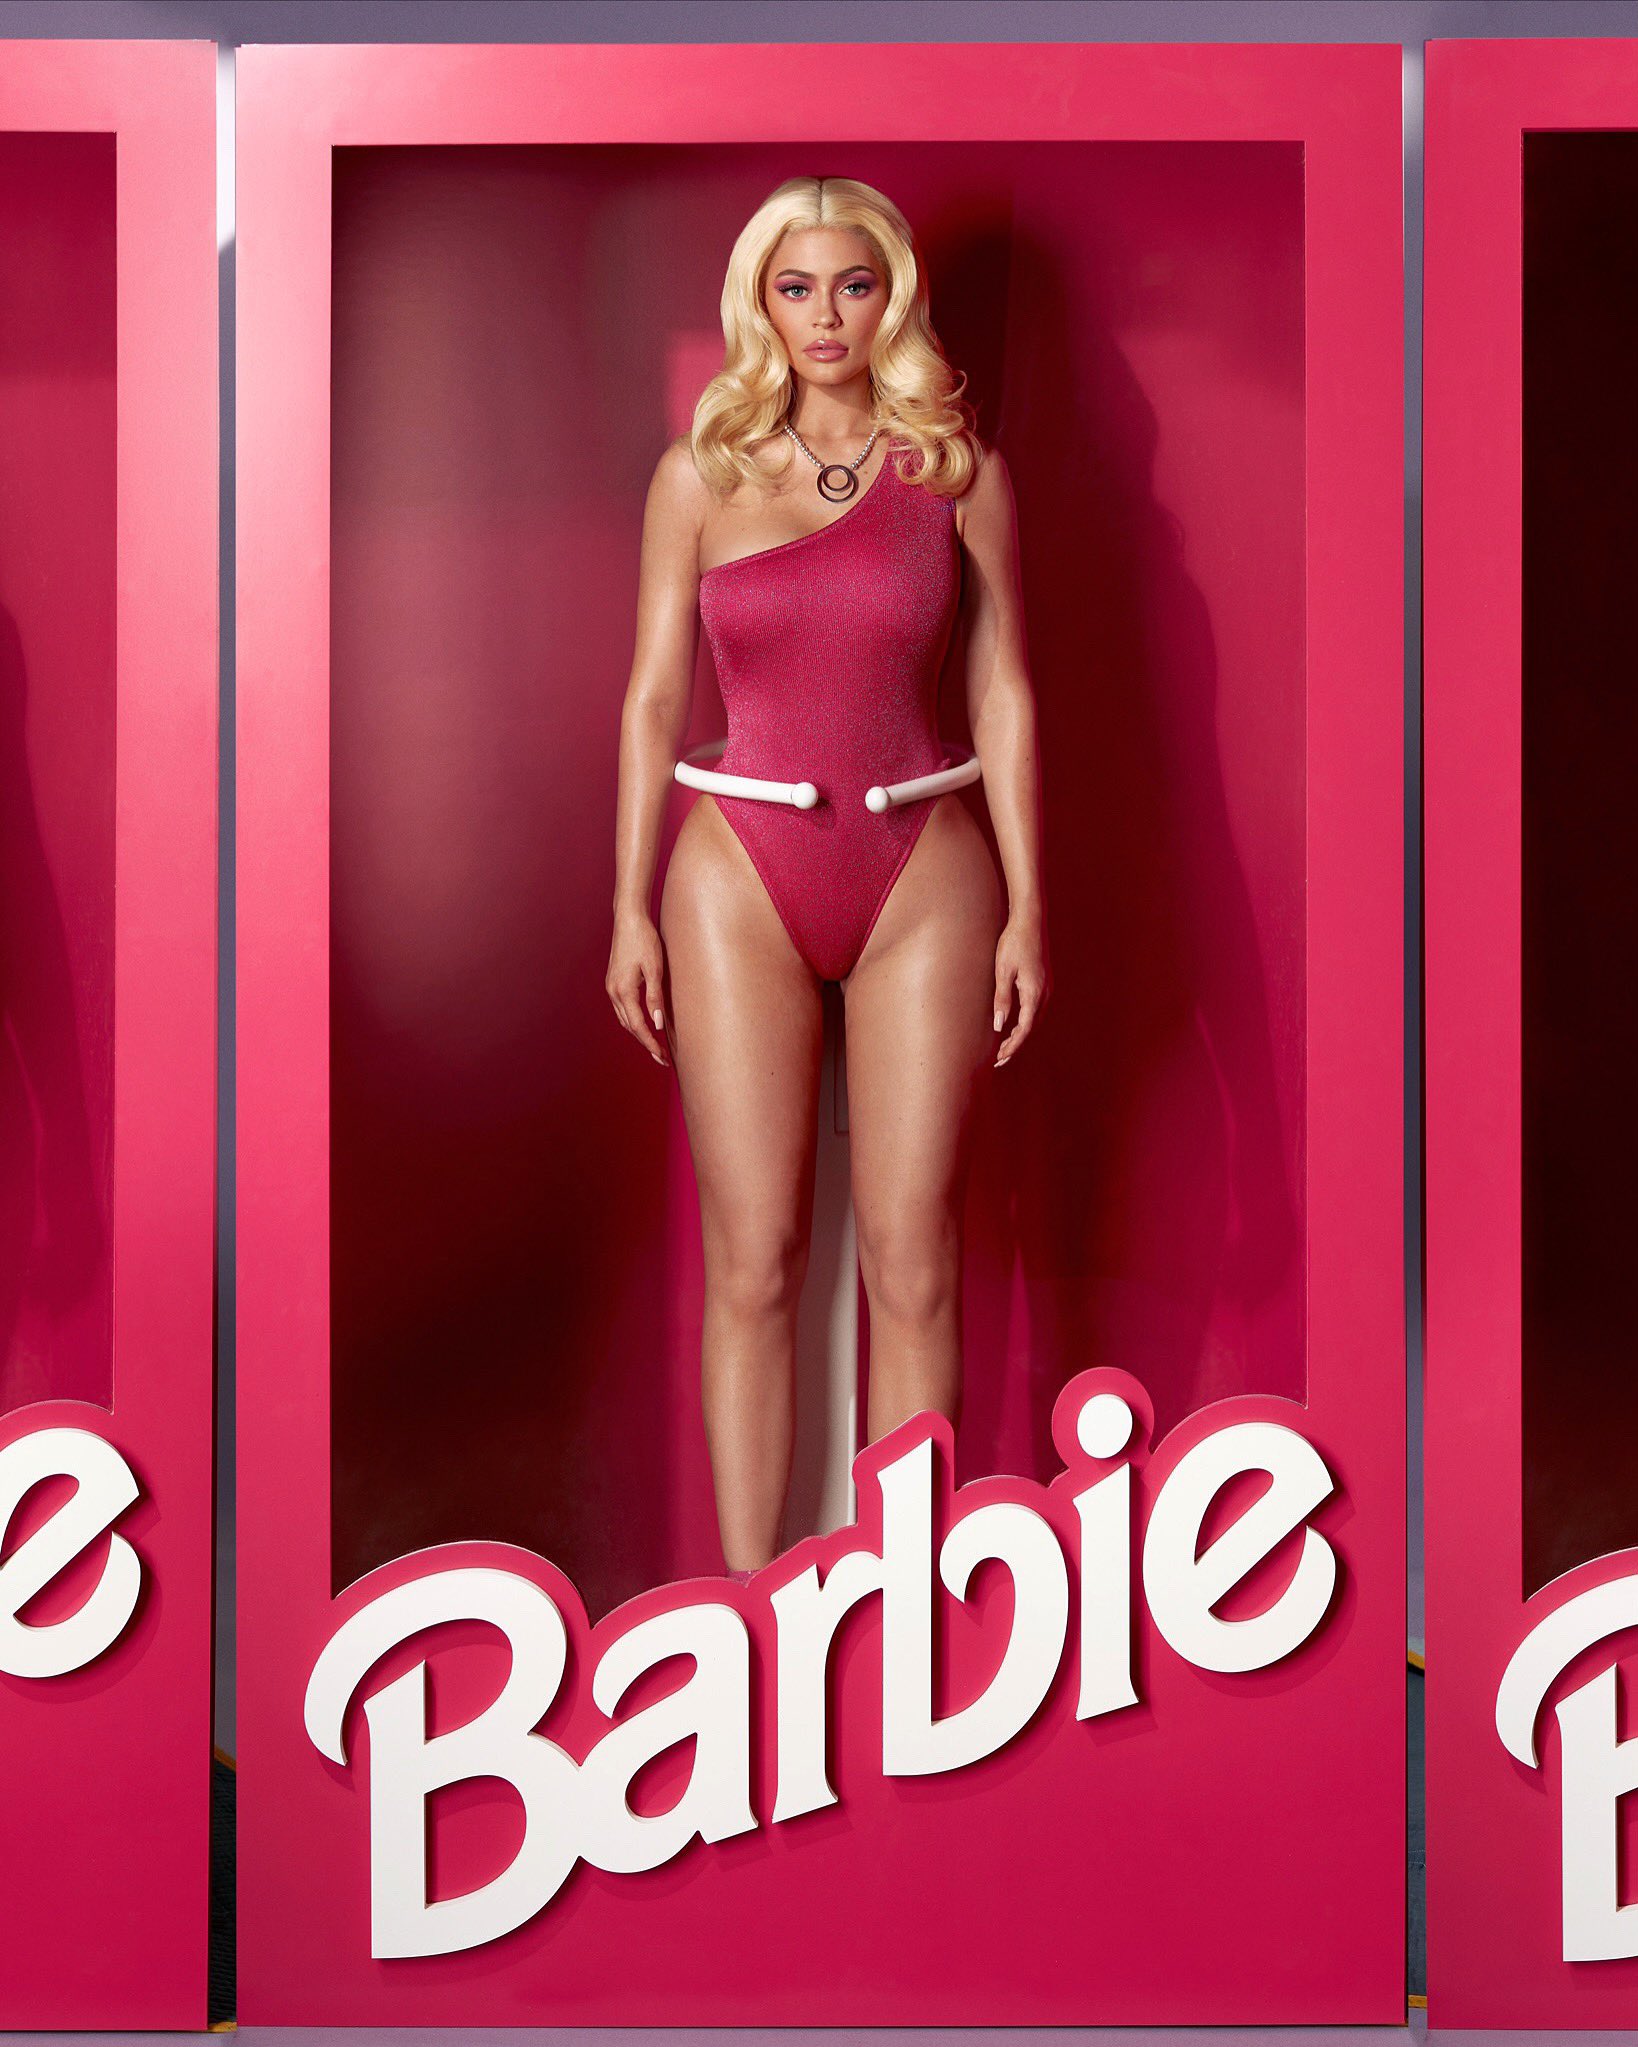 Kylie Jenner â€“ Dressed up as Barbie for Halloween